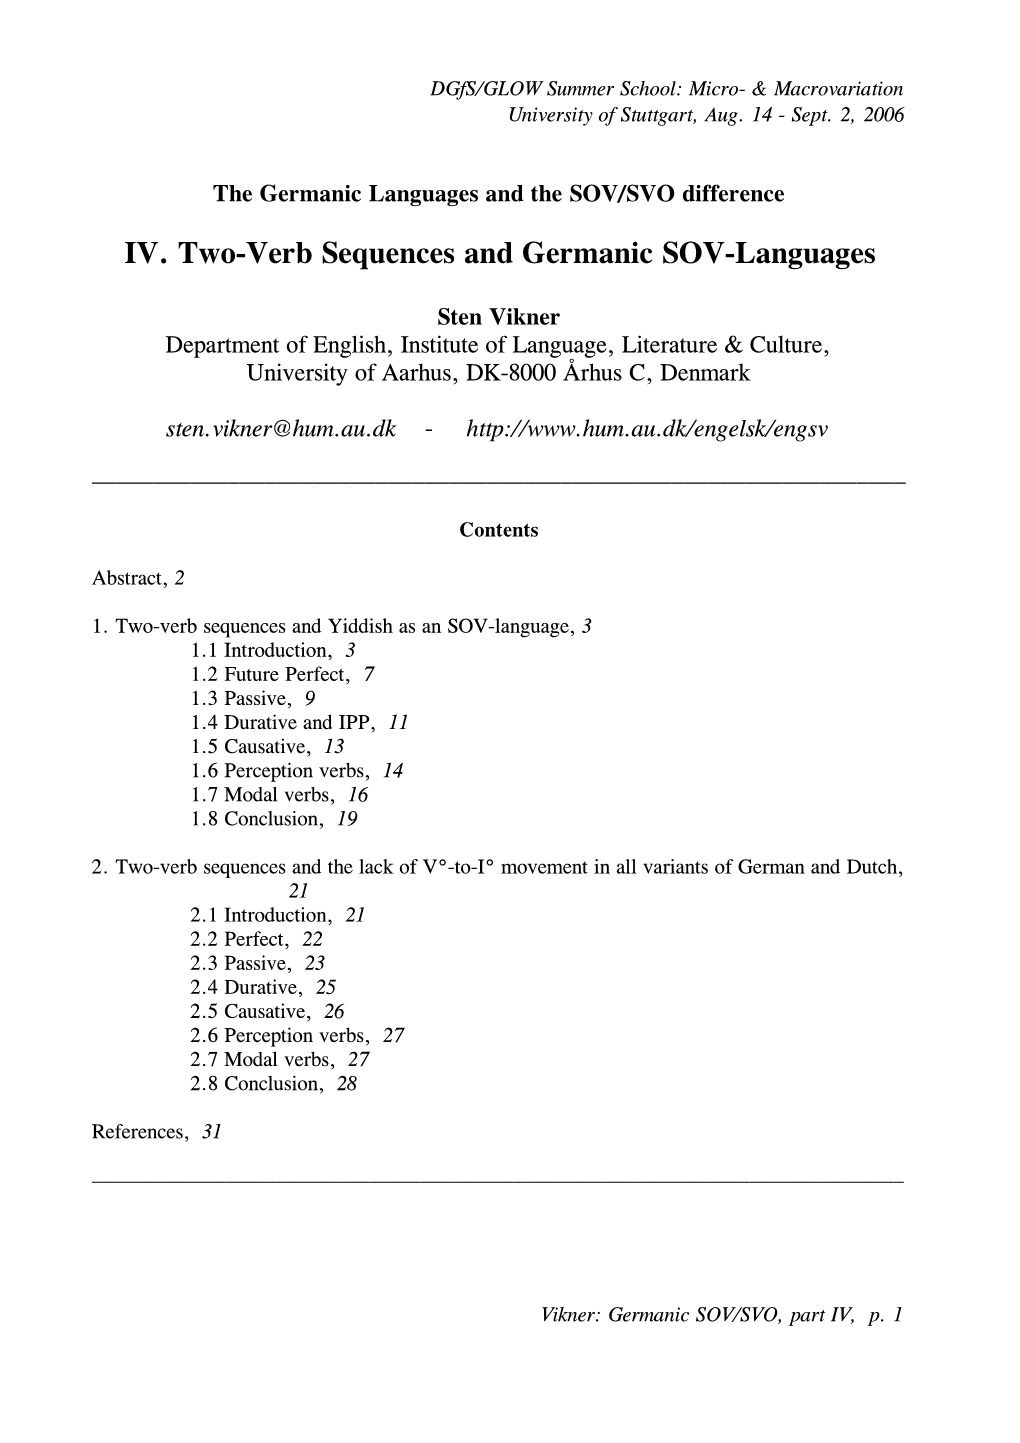 IV. Two-Verb Sequences and Germanic SOV-Languages